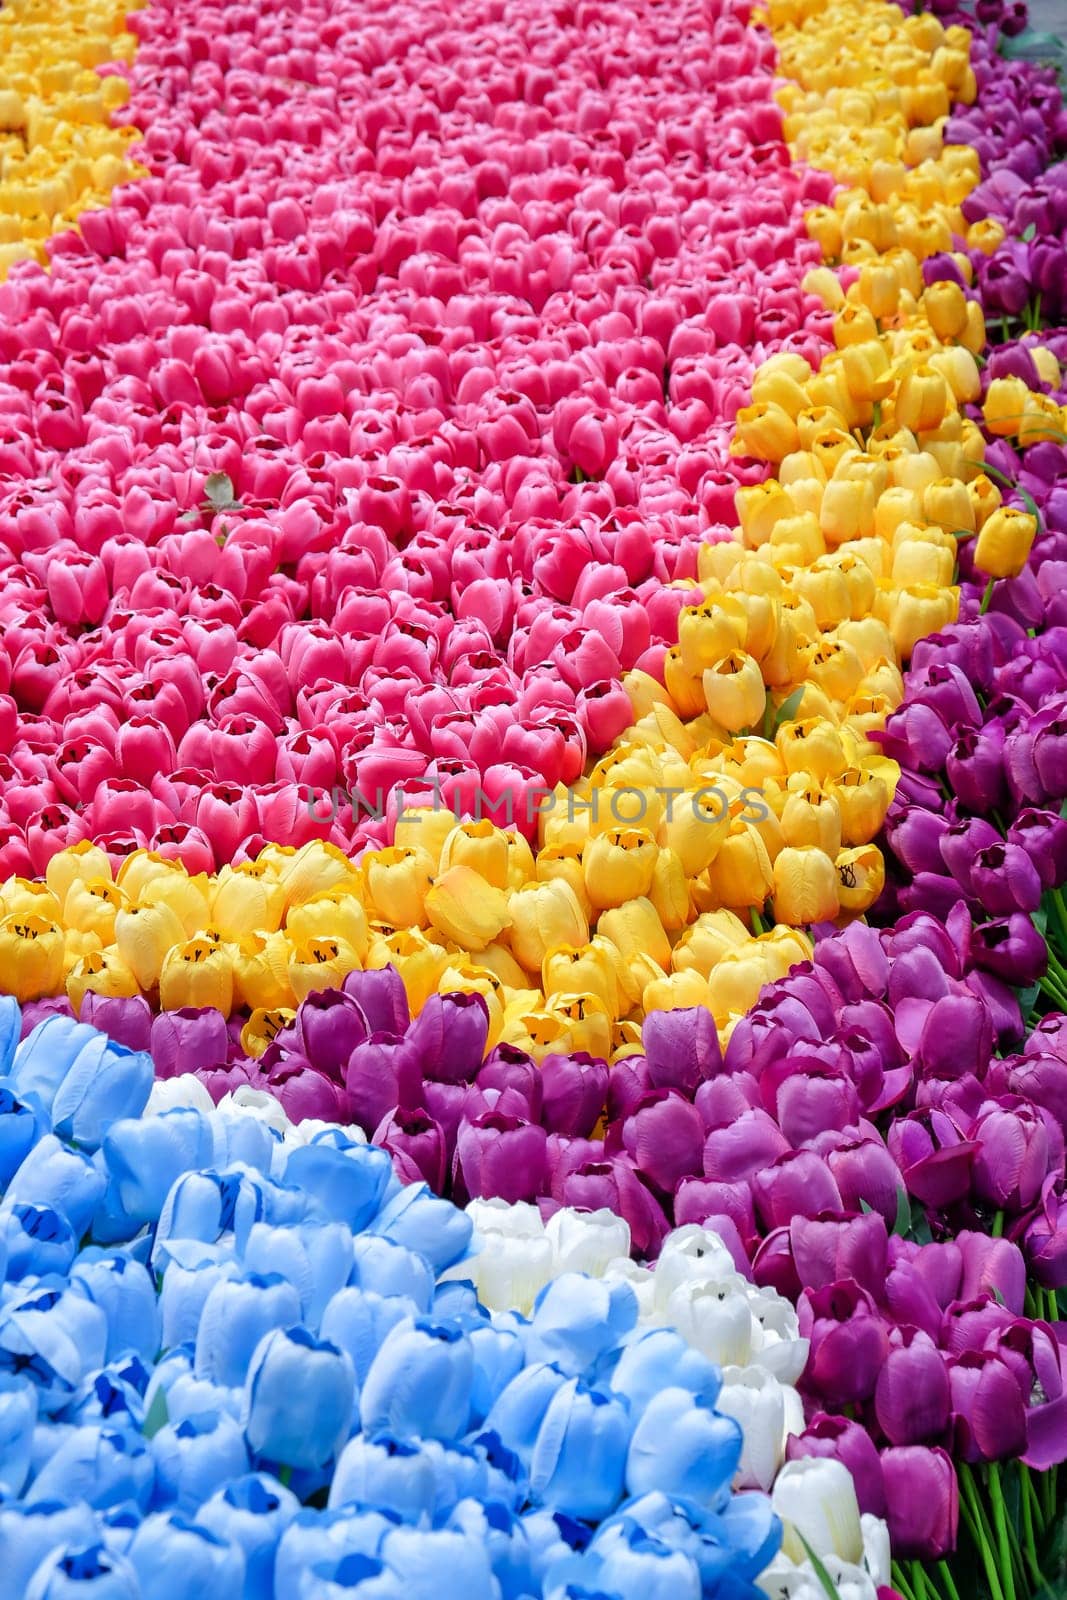 imitation flower, Colorful artificial tulip flowers in the flowerbed.